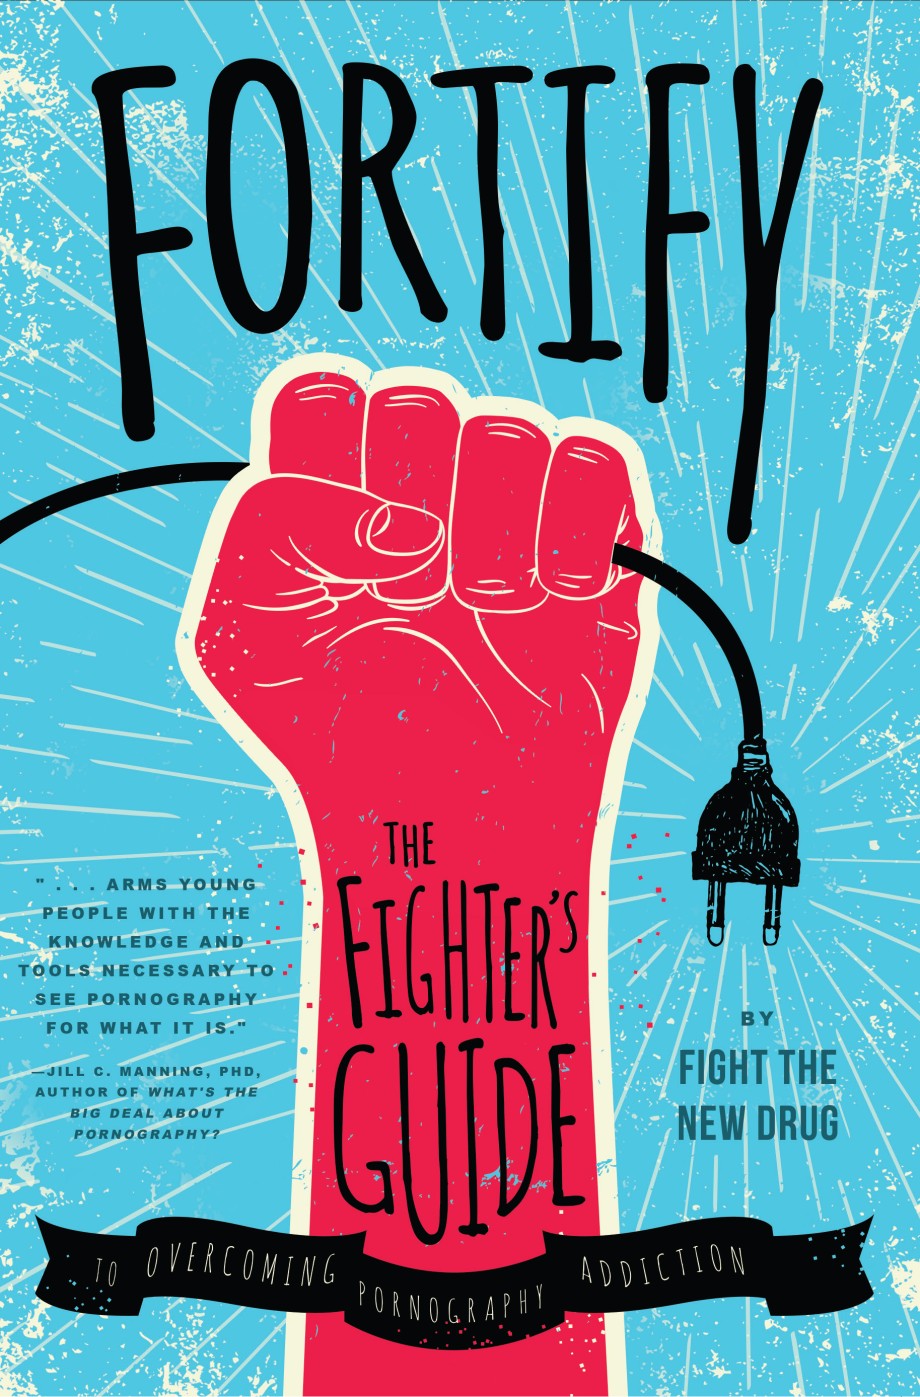 Fortify The Fighter's Guide to Overcoming Pornography Addiction